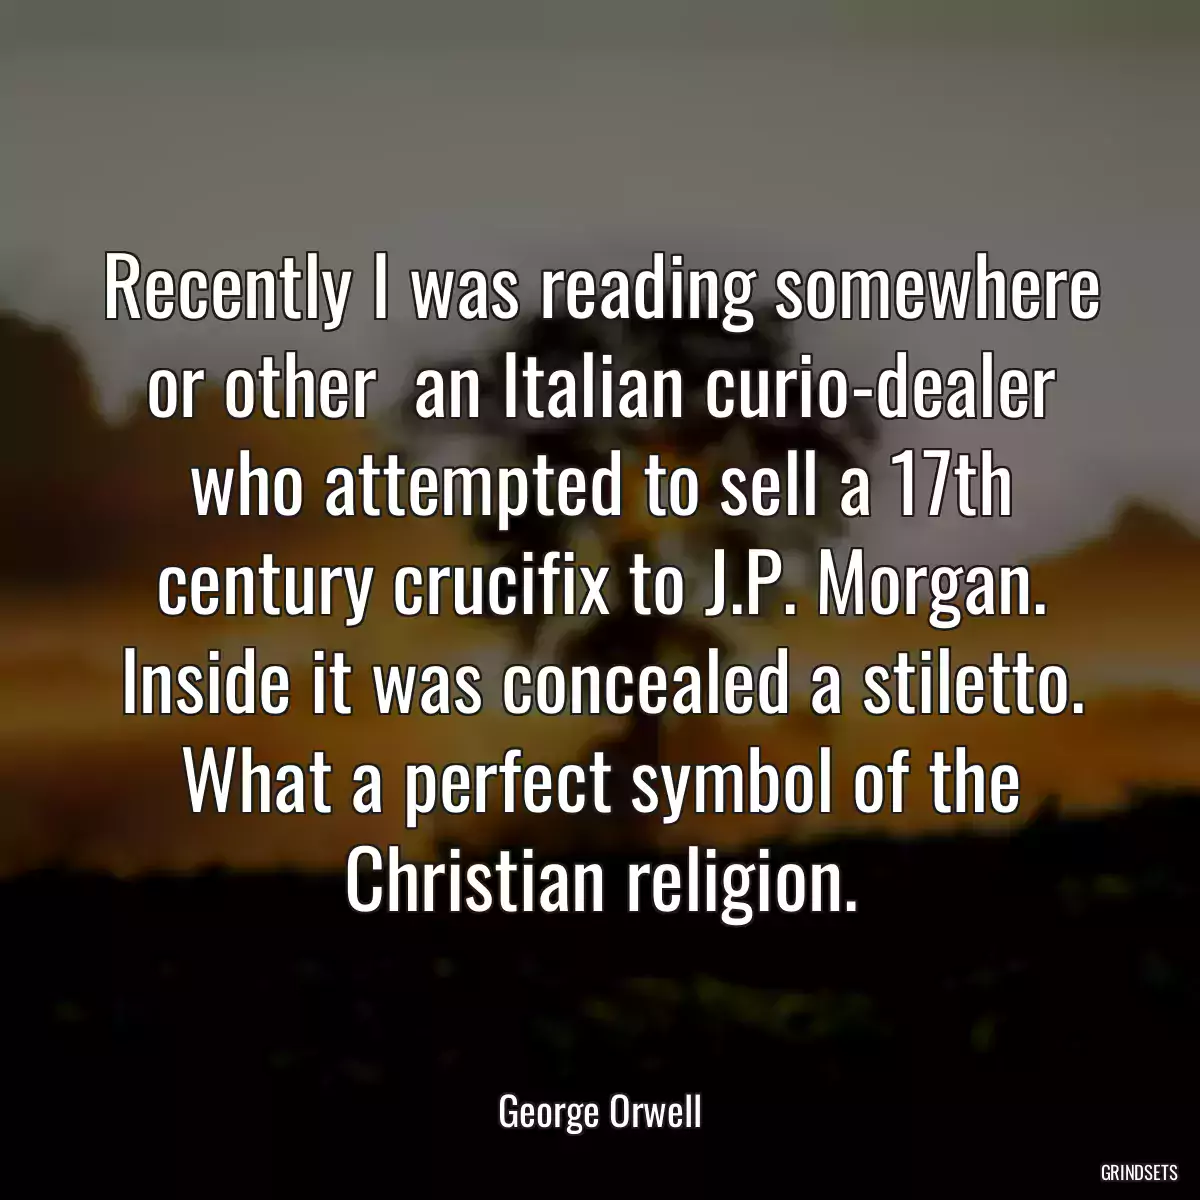 Recently I was reading somewhere or other  an Italian curio-dealer who attempted to sell a 17th century crucifix to J.P. Morgan. Inside it was concealed a stiletto. What a perfect symbol of the Christian religion.